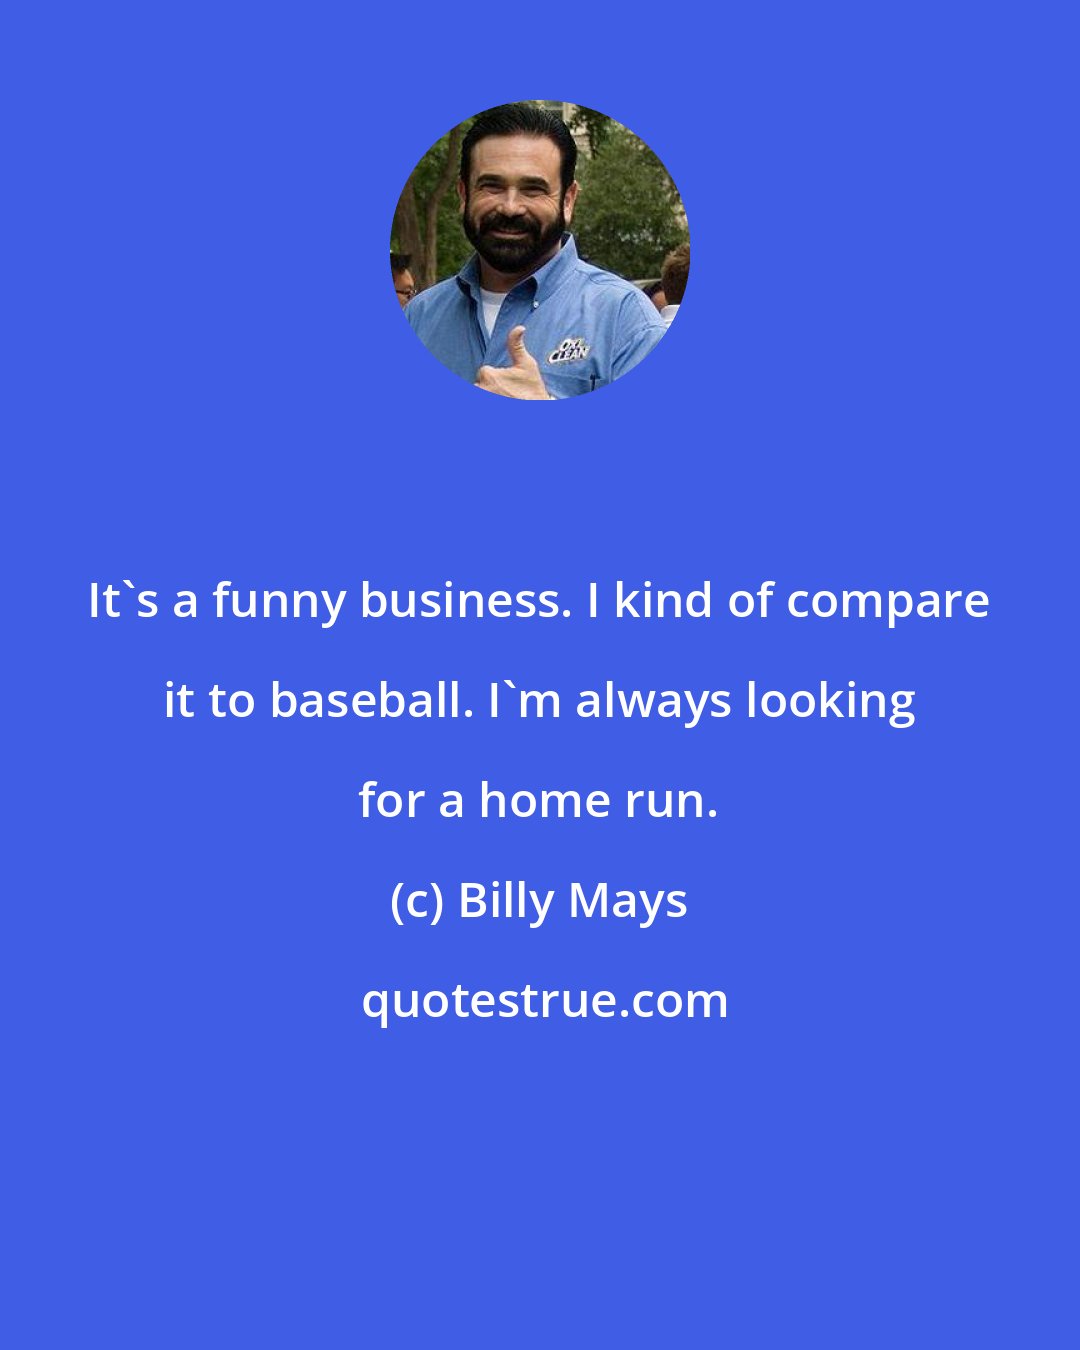 Billy Mays: It's a funny business. I kind of compare it to baseball. I'm always looking for a home run.